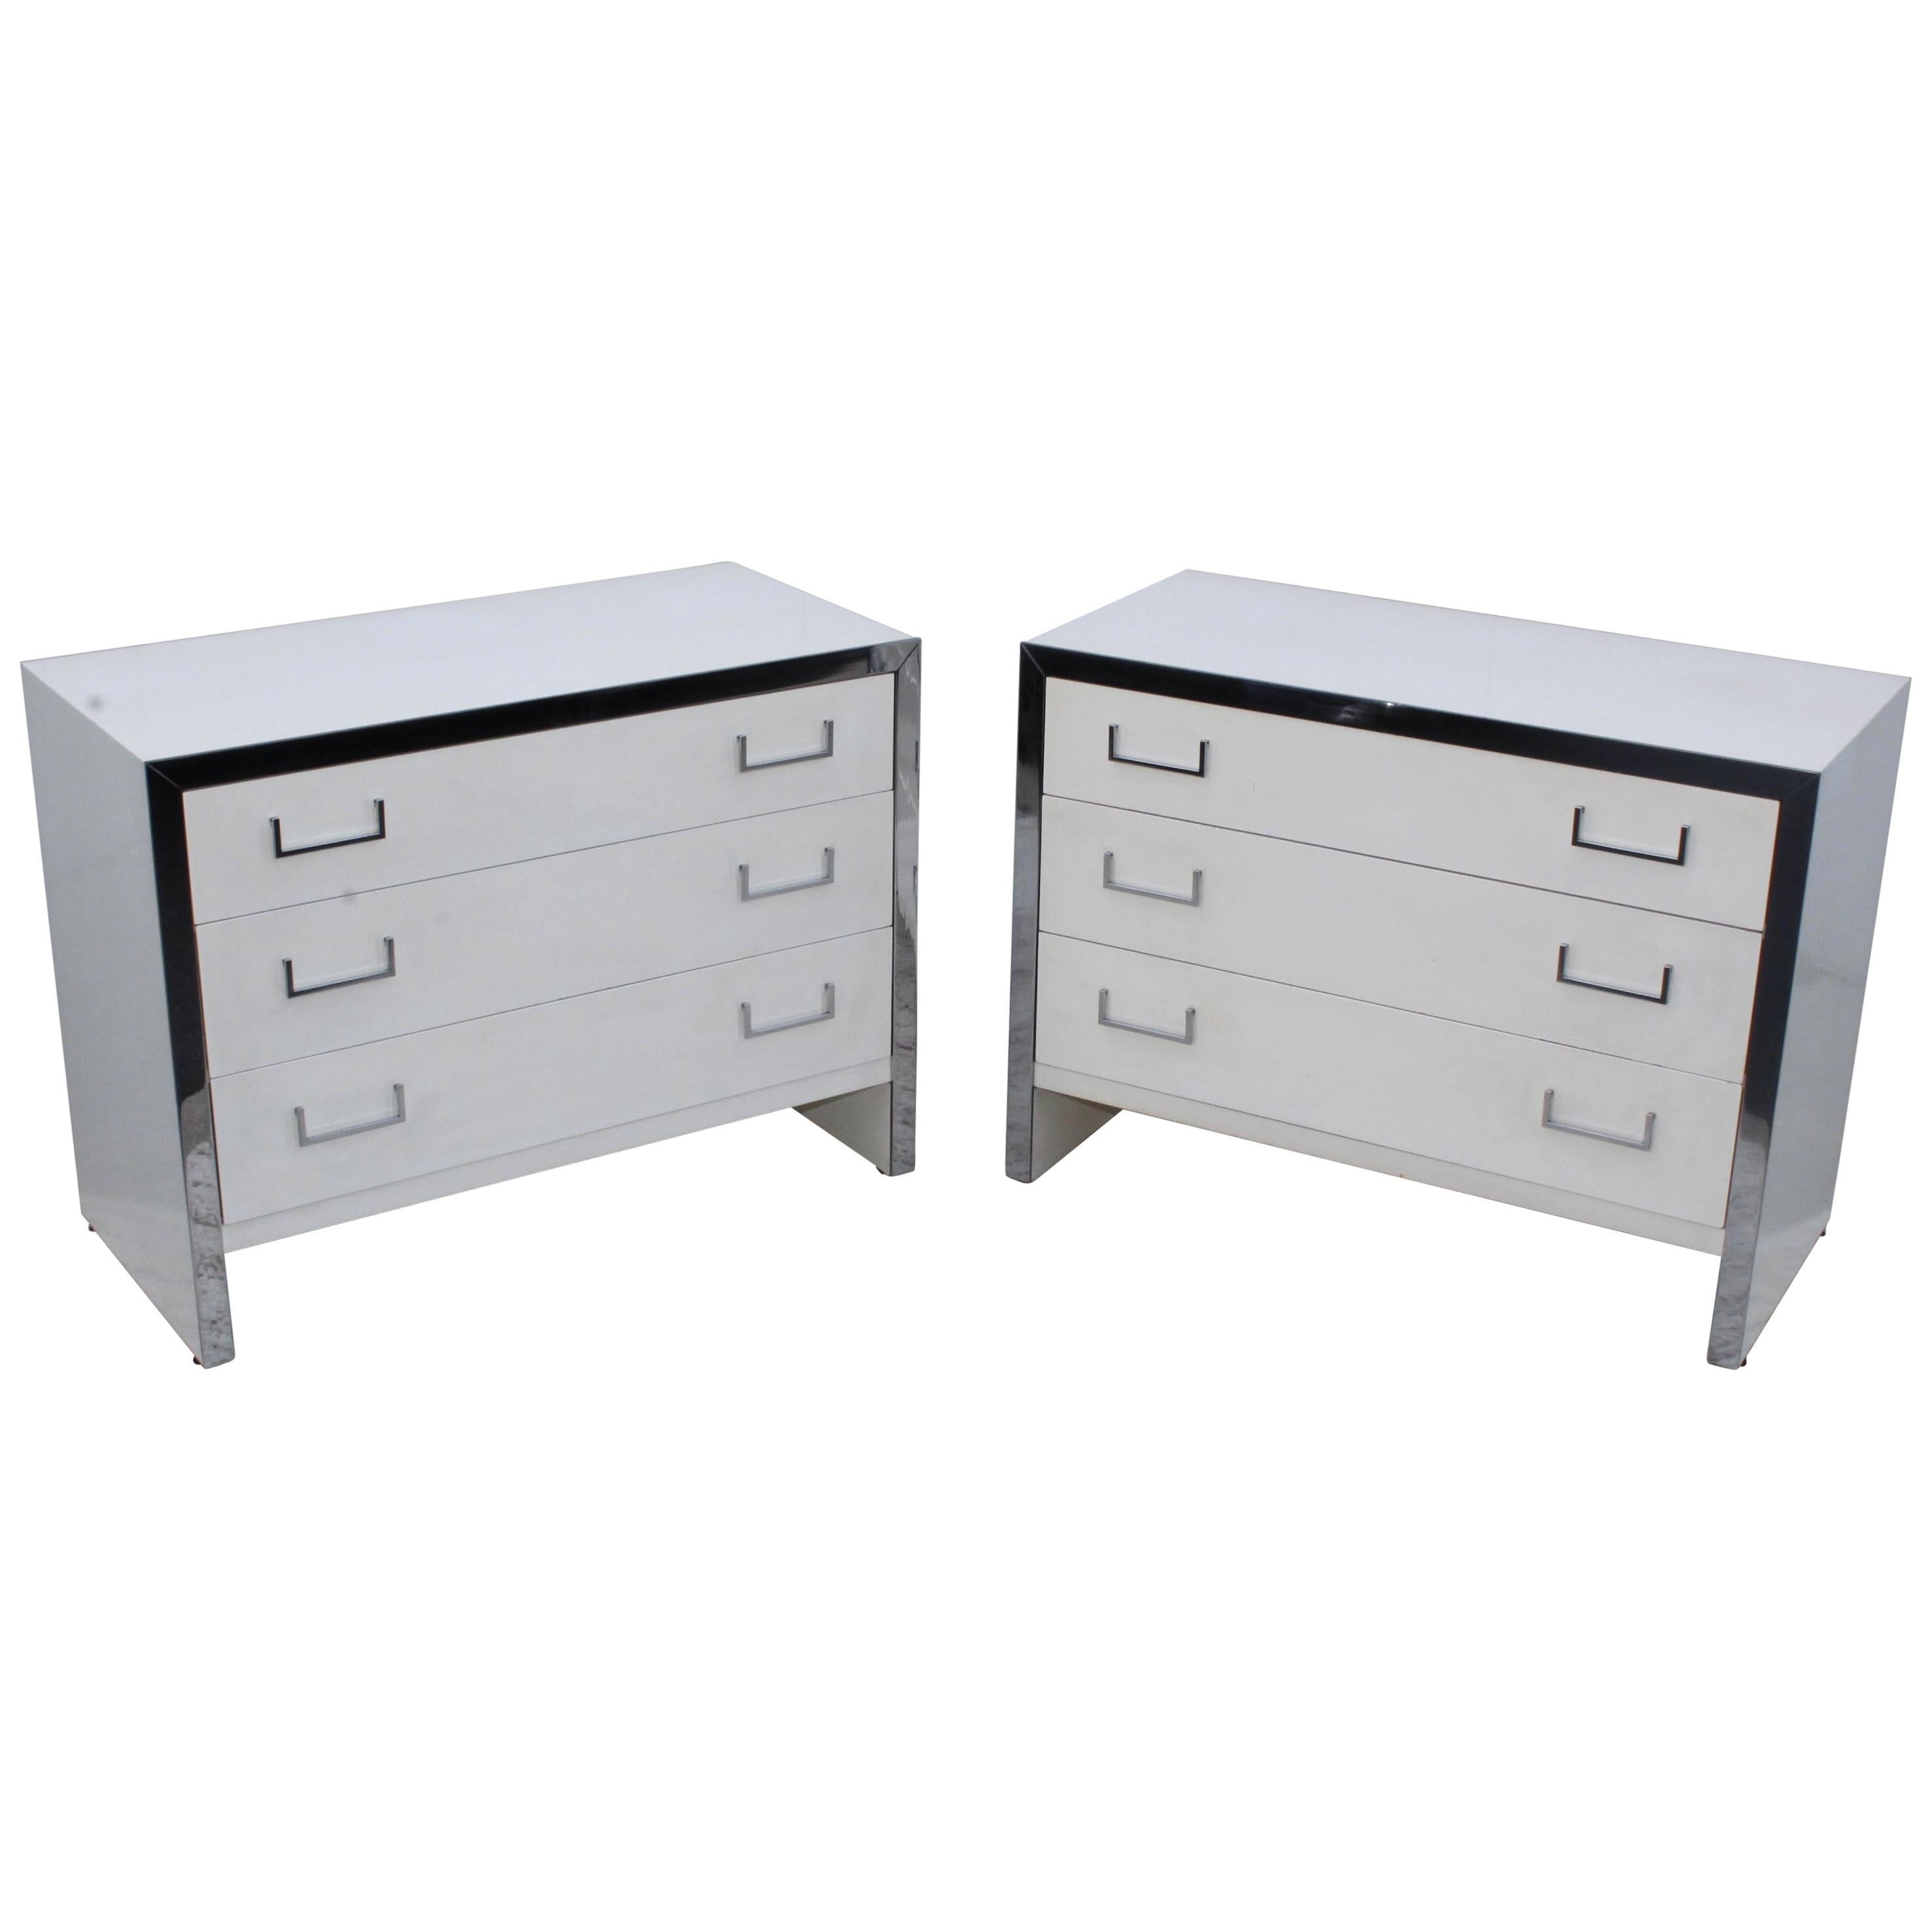 1970s Chrome and Lacquer Mid-Century Modern Dressers by John Stuart